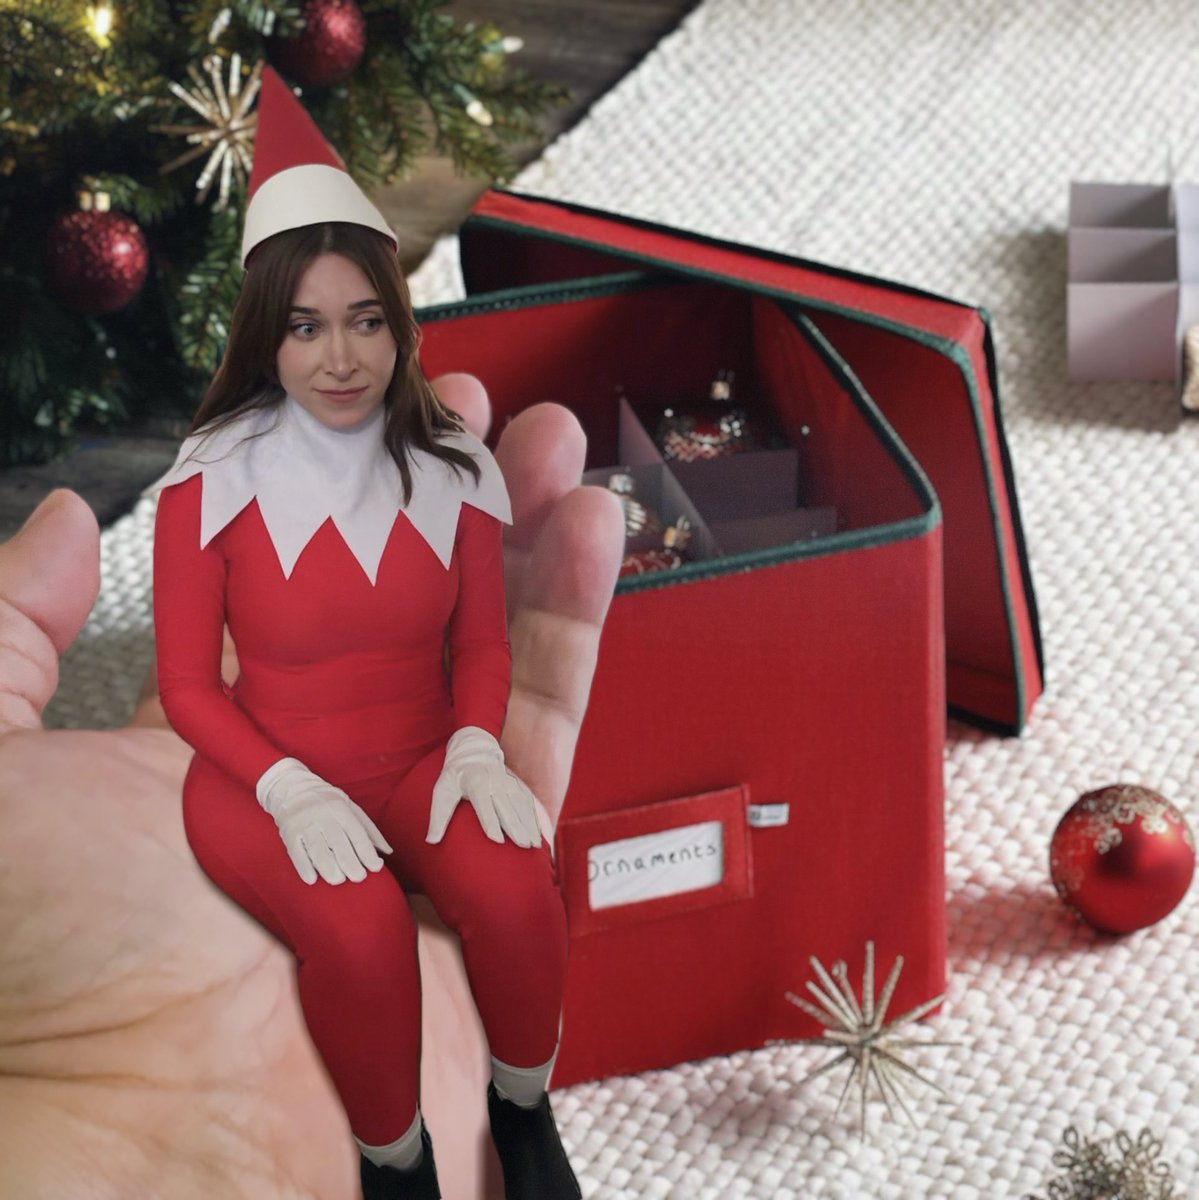 The gig was up Arrietty either came clean about not being an Elf on the Shelf, or she spent the next ten months in a decoration box…
#borrowers #arrietty #elfontheshelf